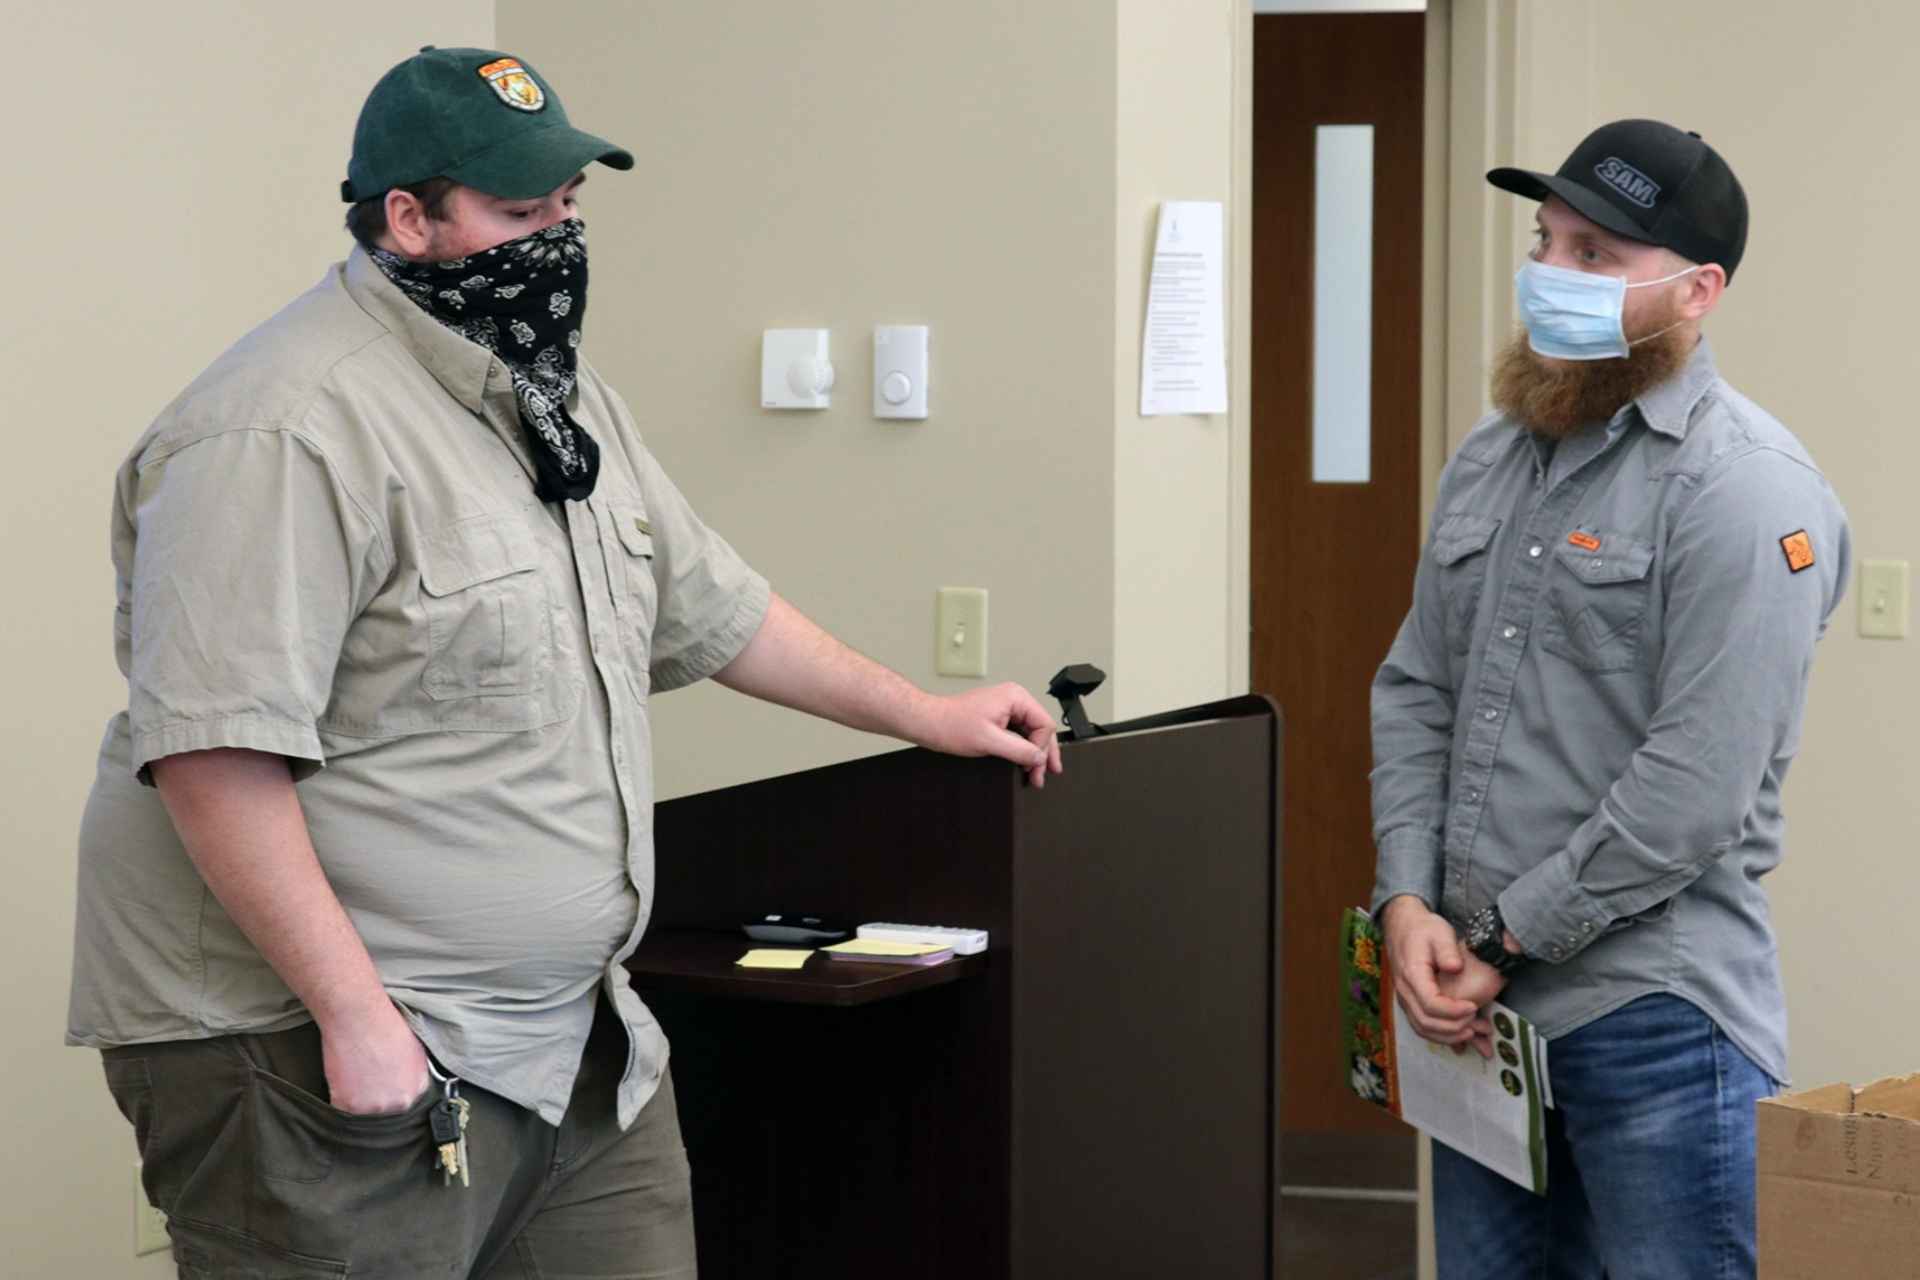 During his recent visit to Glenville State College’s Department of Land Resources, GSC graduate and current WV Division of Natural Resources Wildlife Manager Mitch Queen (left) chats with current student Jacob Petry.